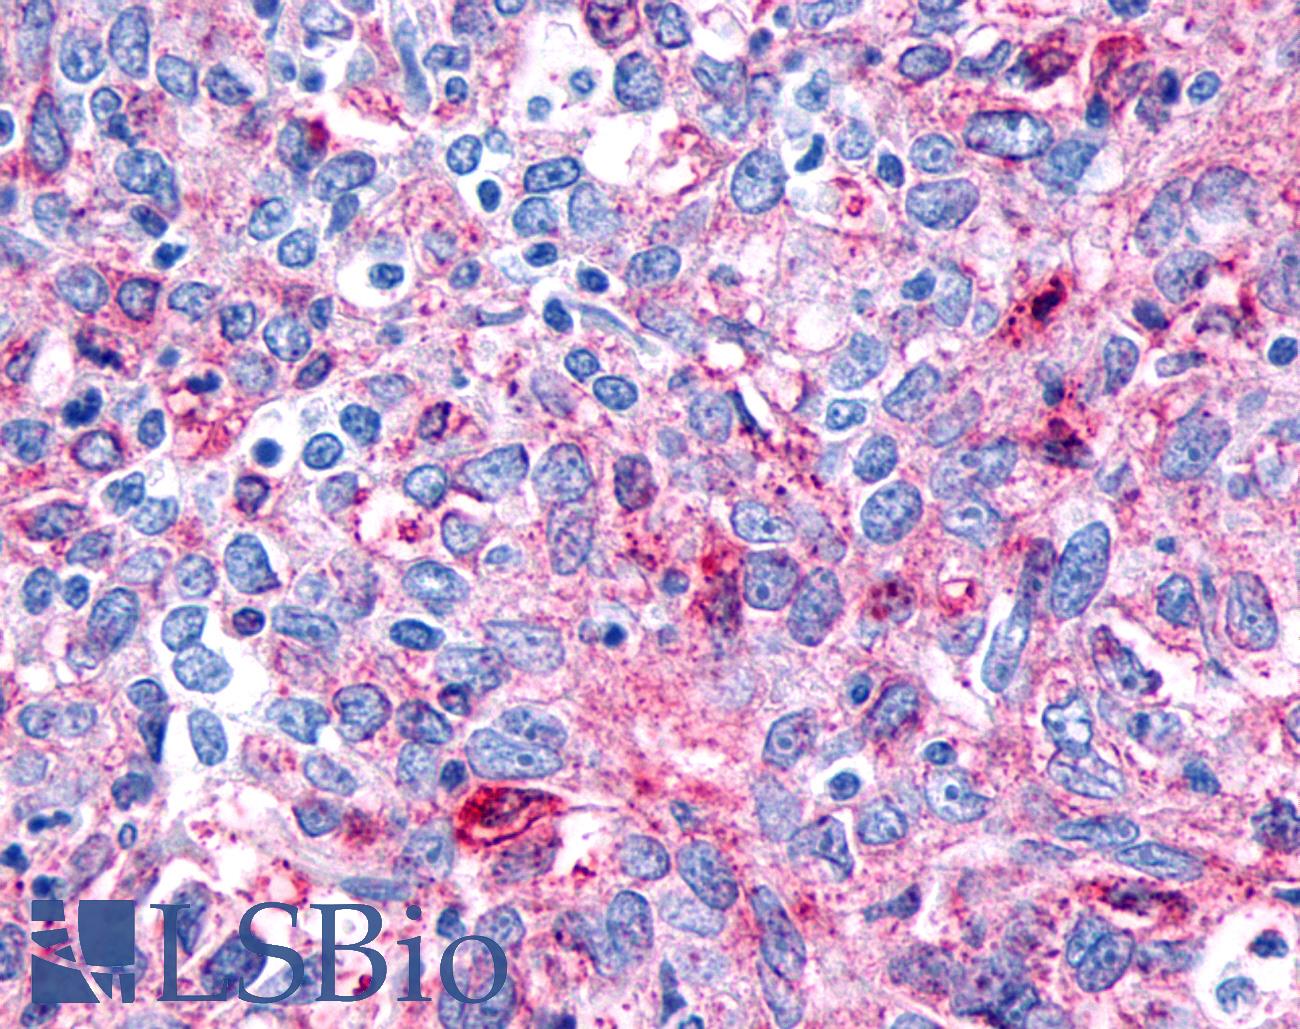 FZD8 / Frizzled 8 Antibody - Anti-FZD8 / Frizzled 8 antibody IHC of human Ovary, Carcinoma. Immunohistochemistry of formalin-fixed, paraffin-embedded tissue after heat-induced antigen retrieval.